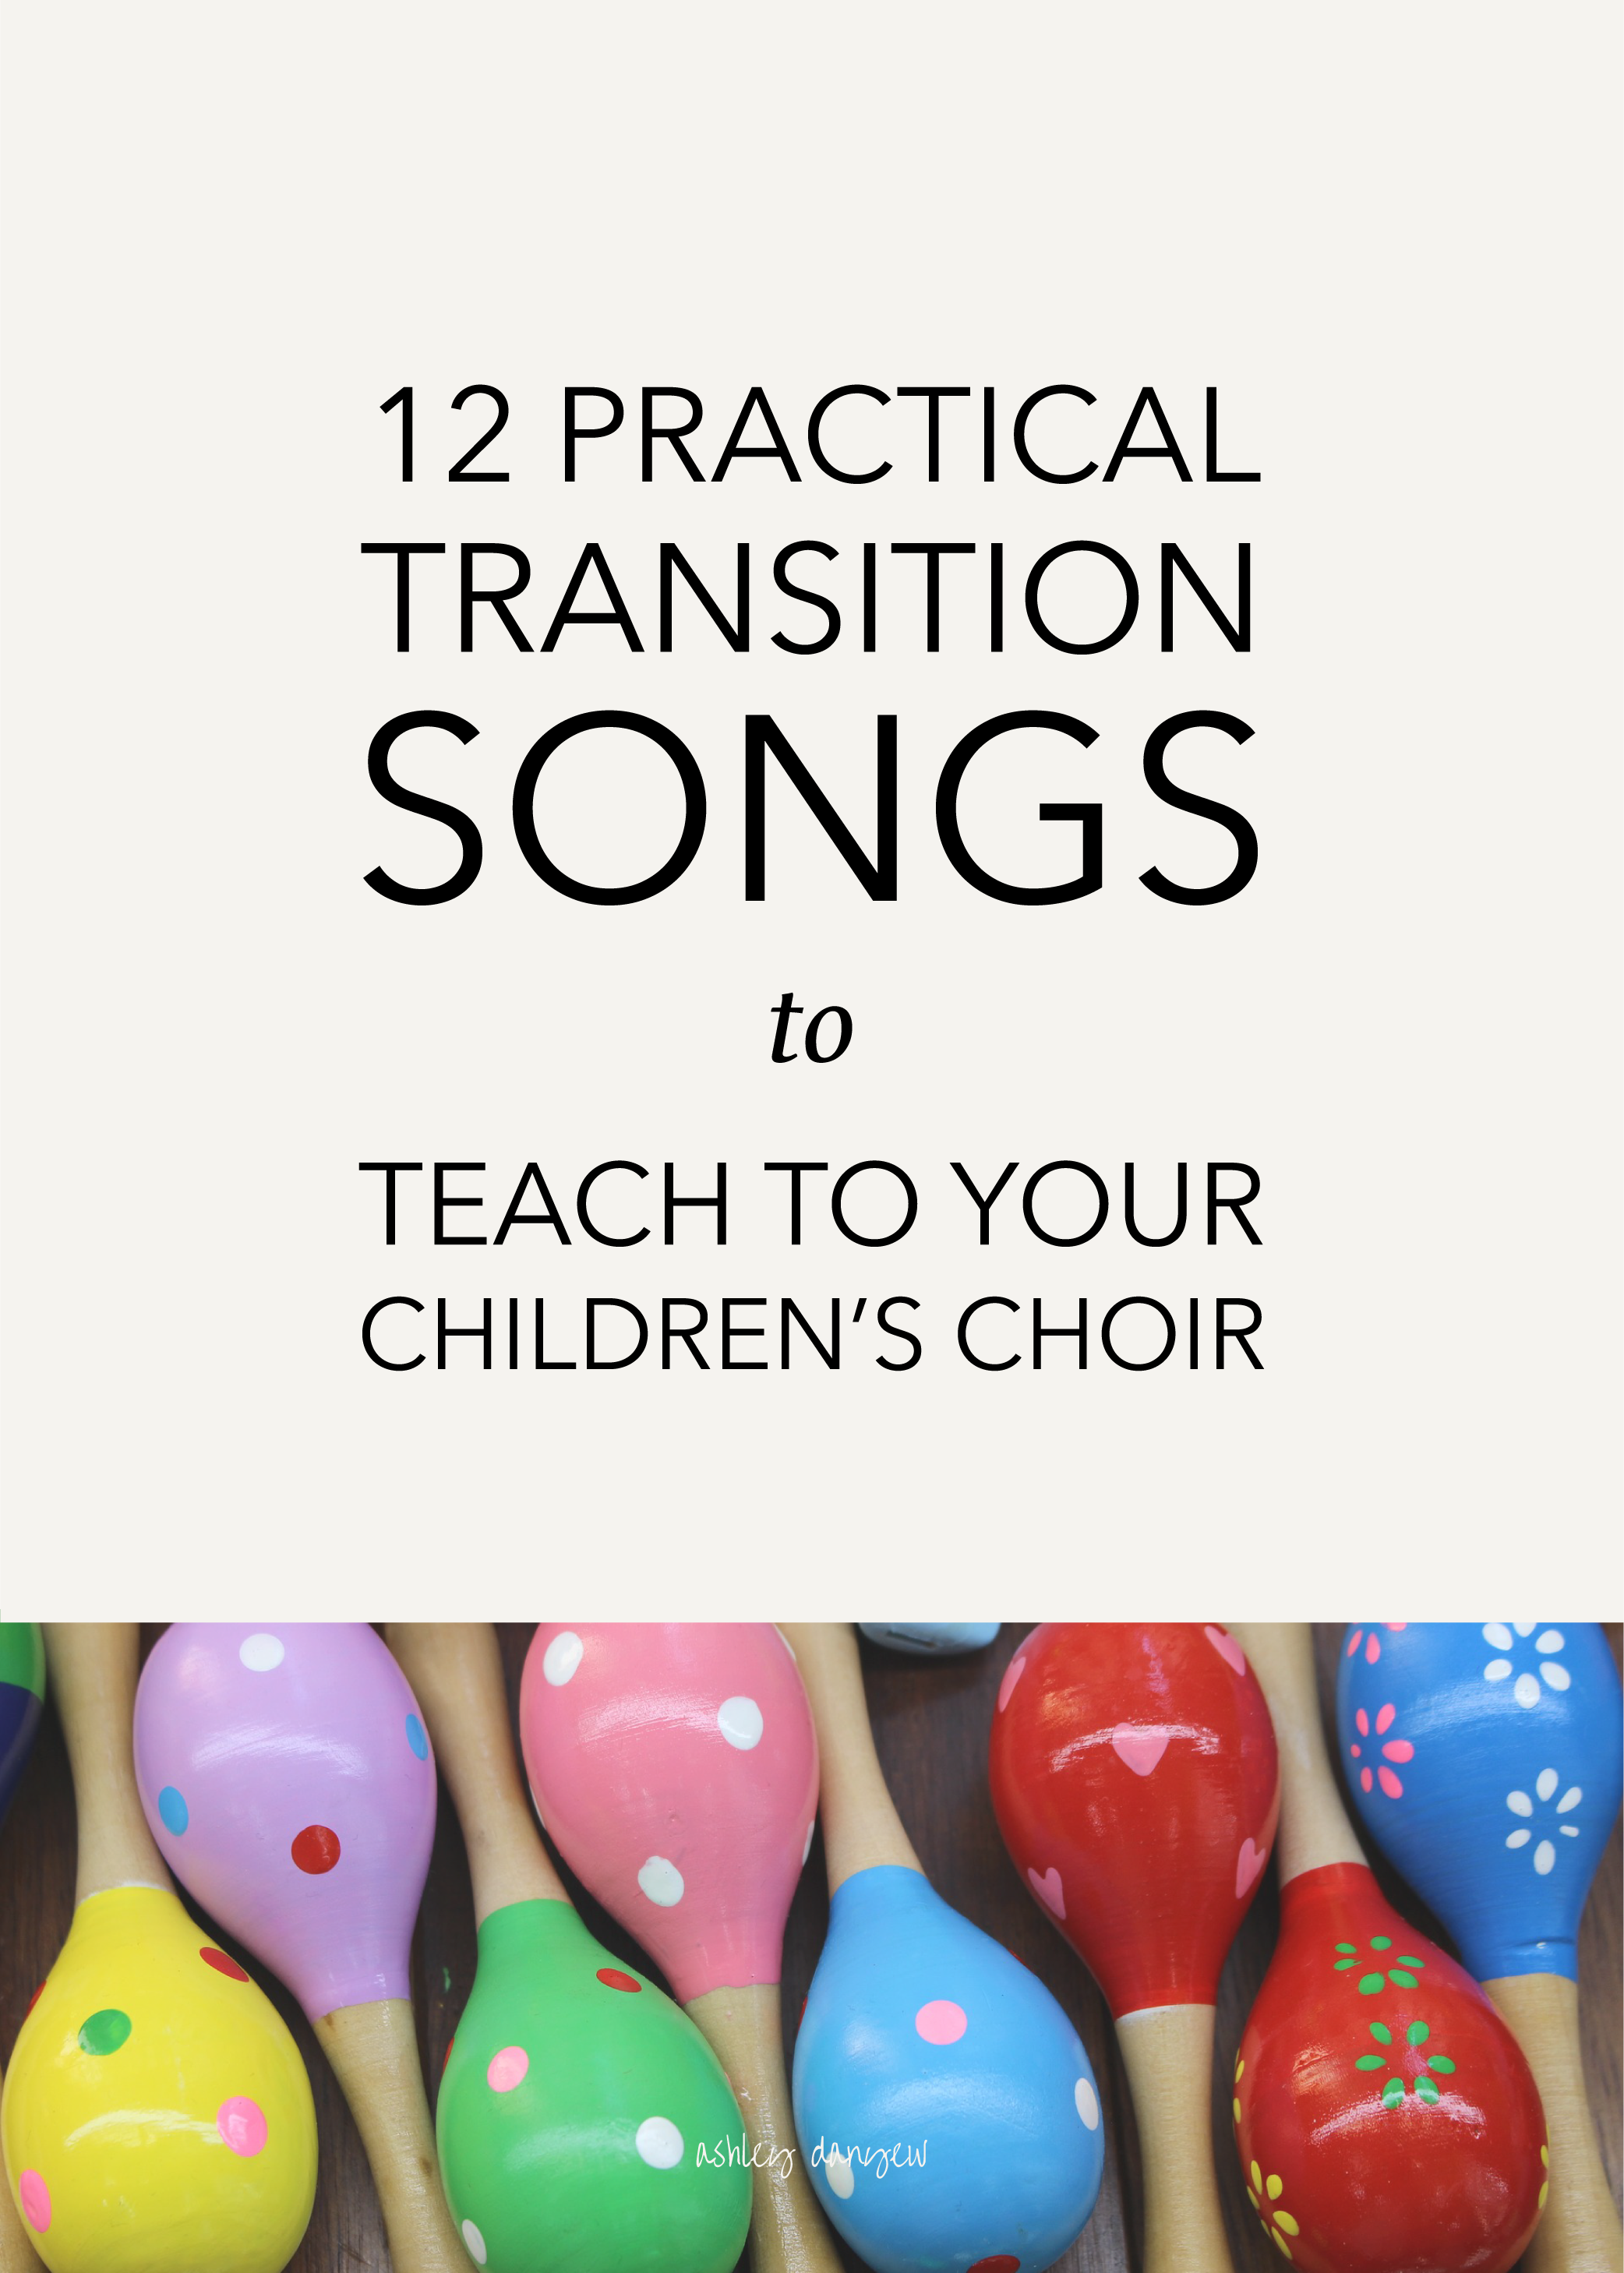 12 Practical Transition Songs to Teach to Your Children's Choir